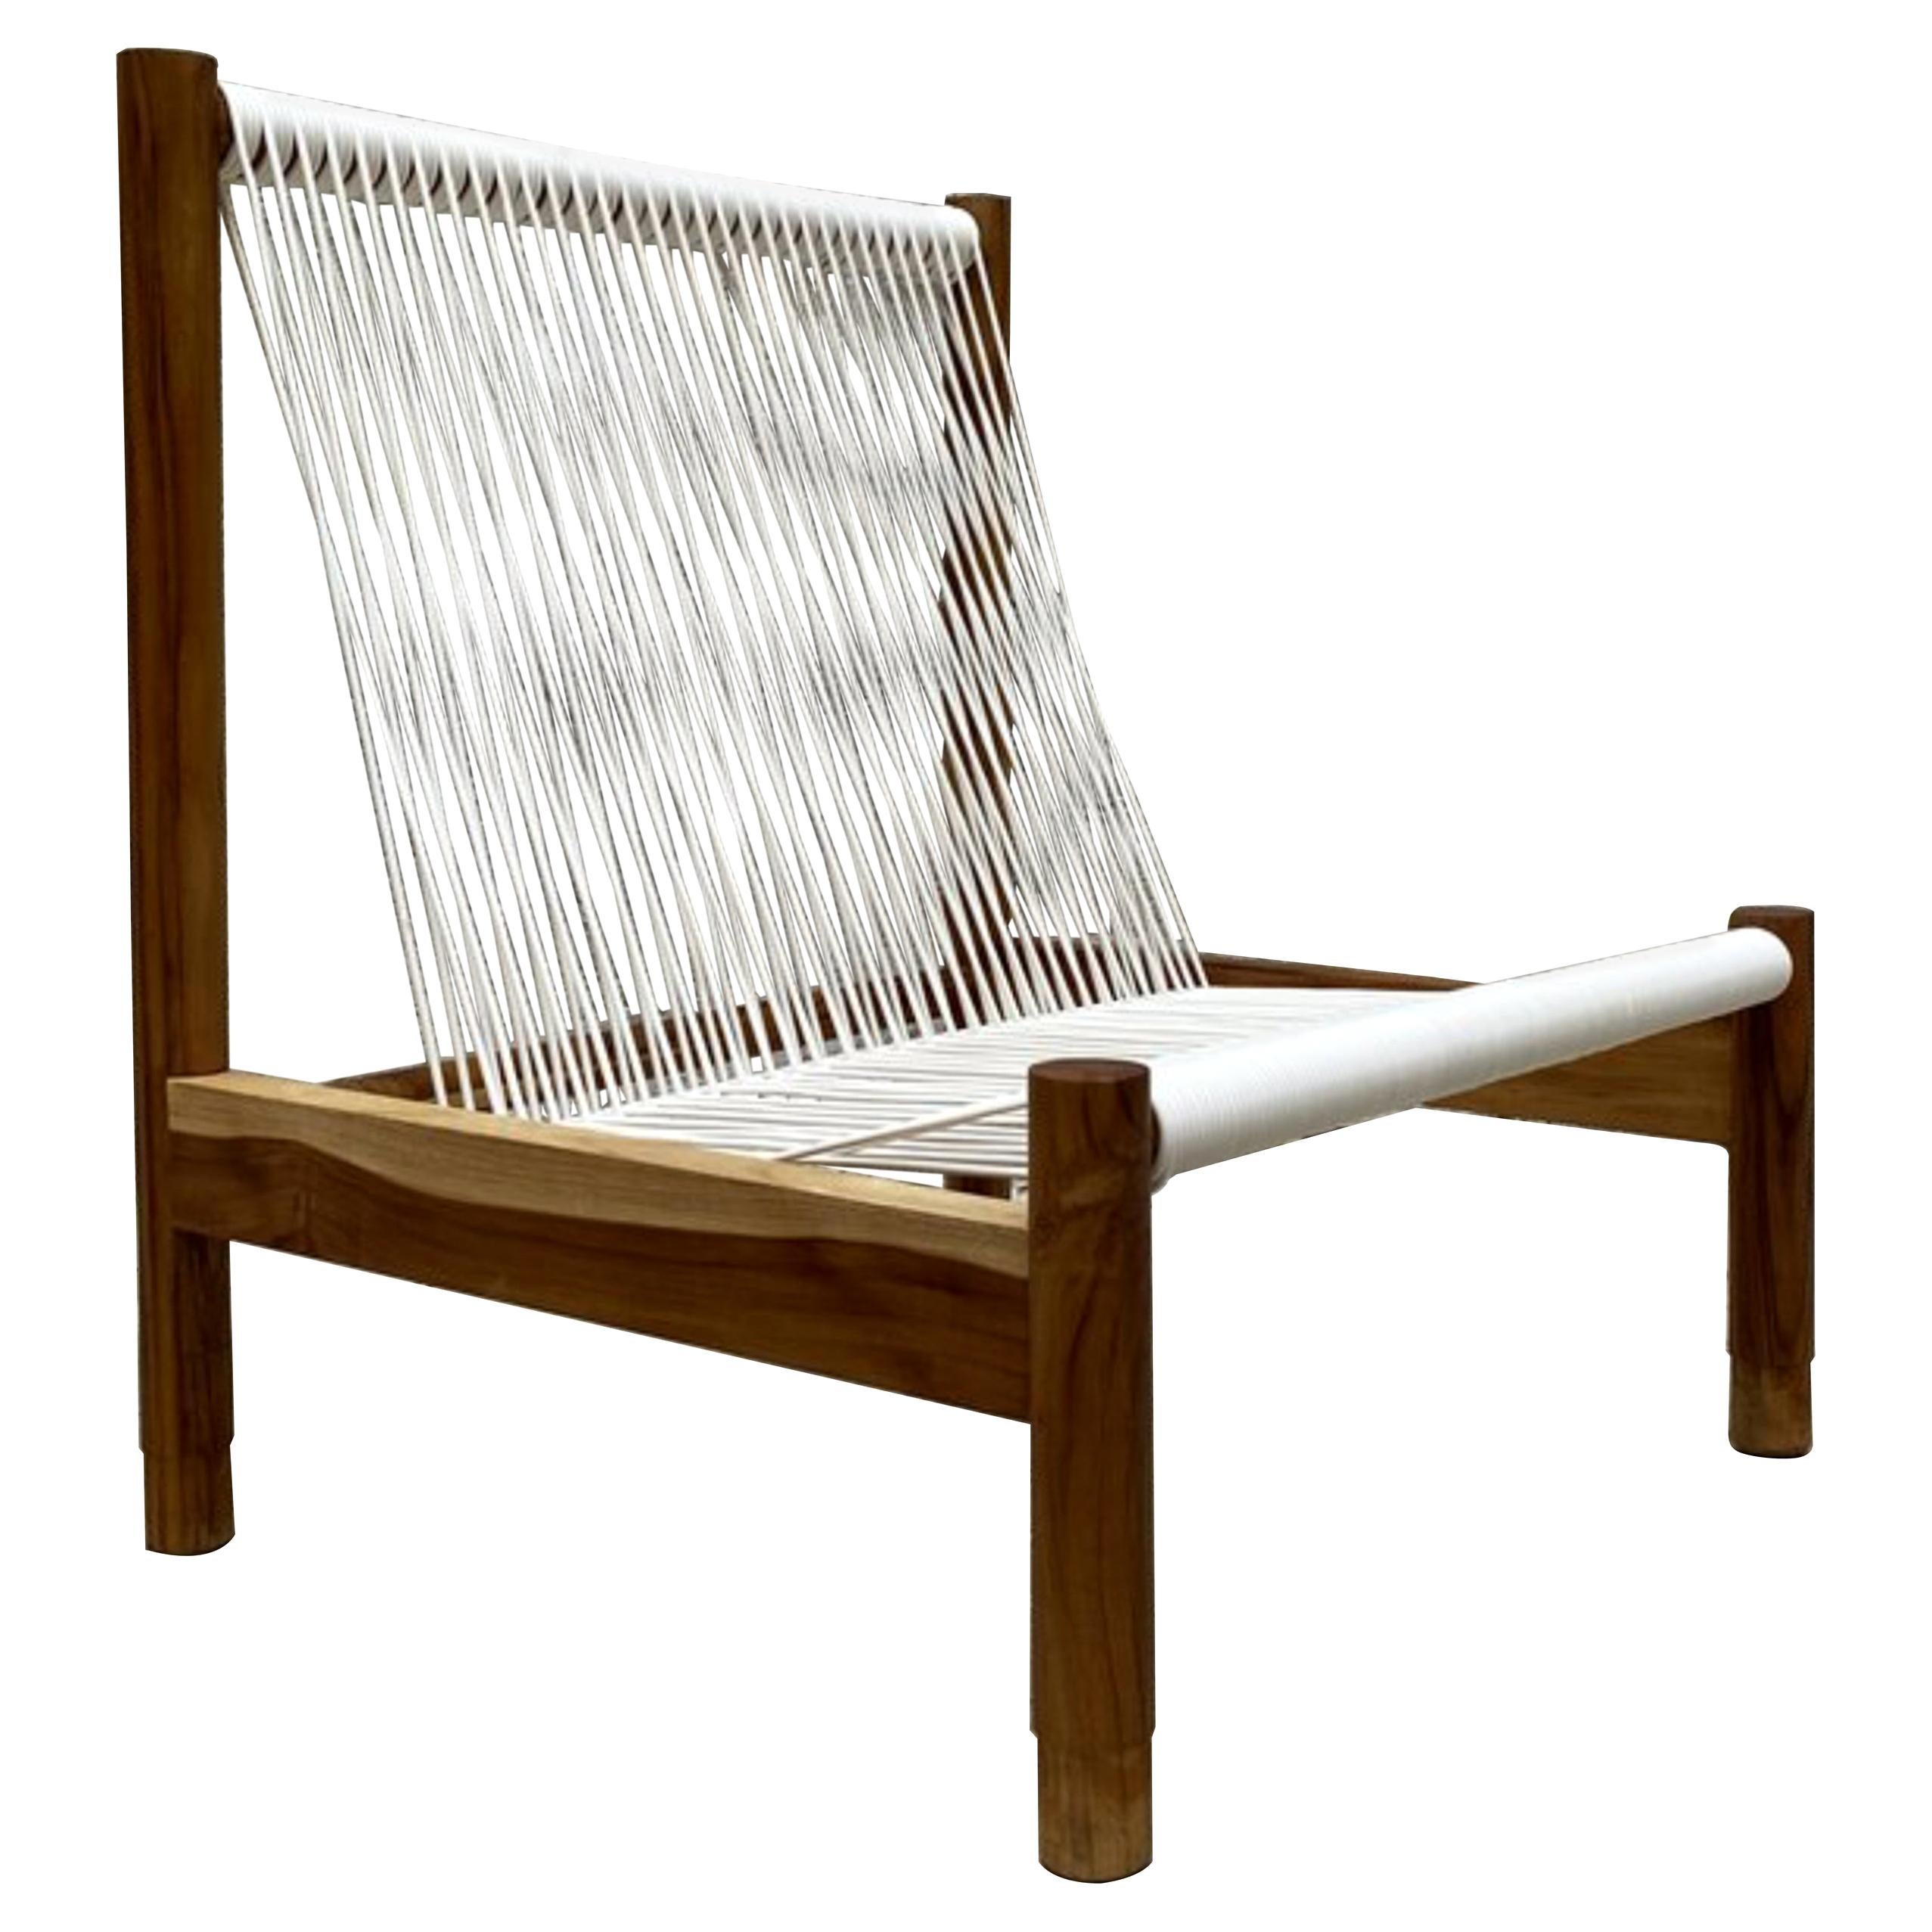 Al Sol Outdoor Chair, Maria Beckmann, Represented by Tuleste Factory For Sale